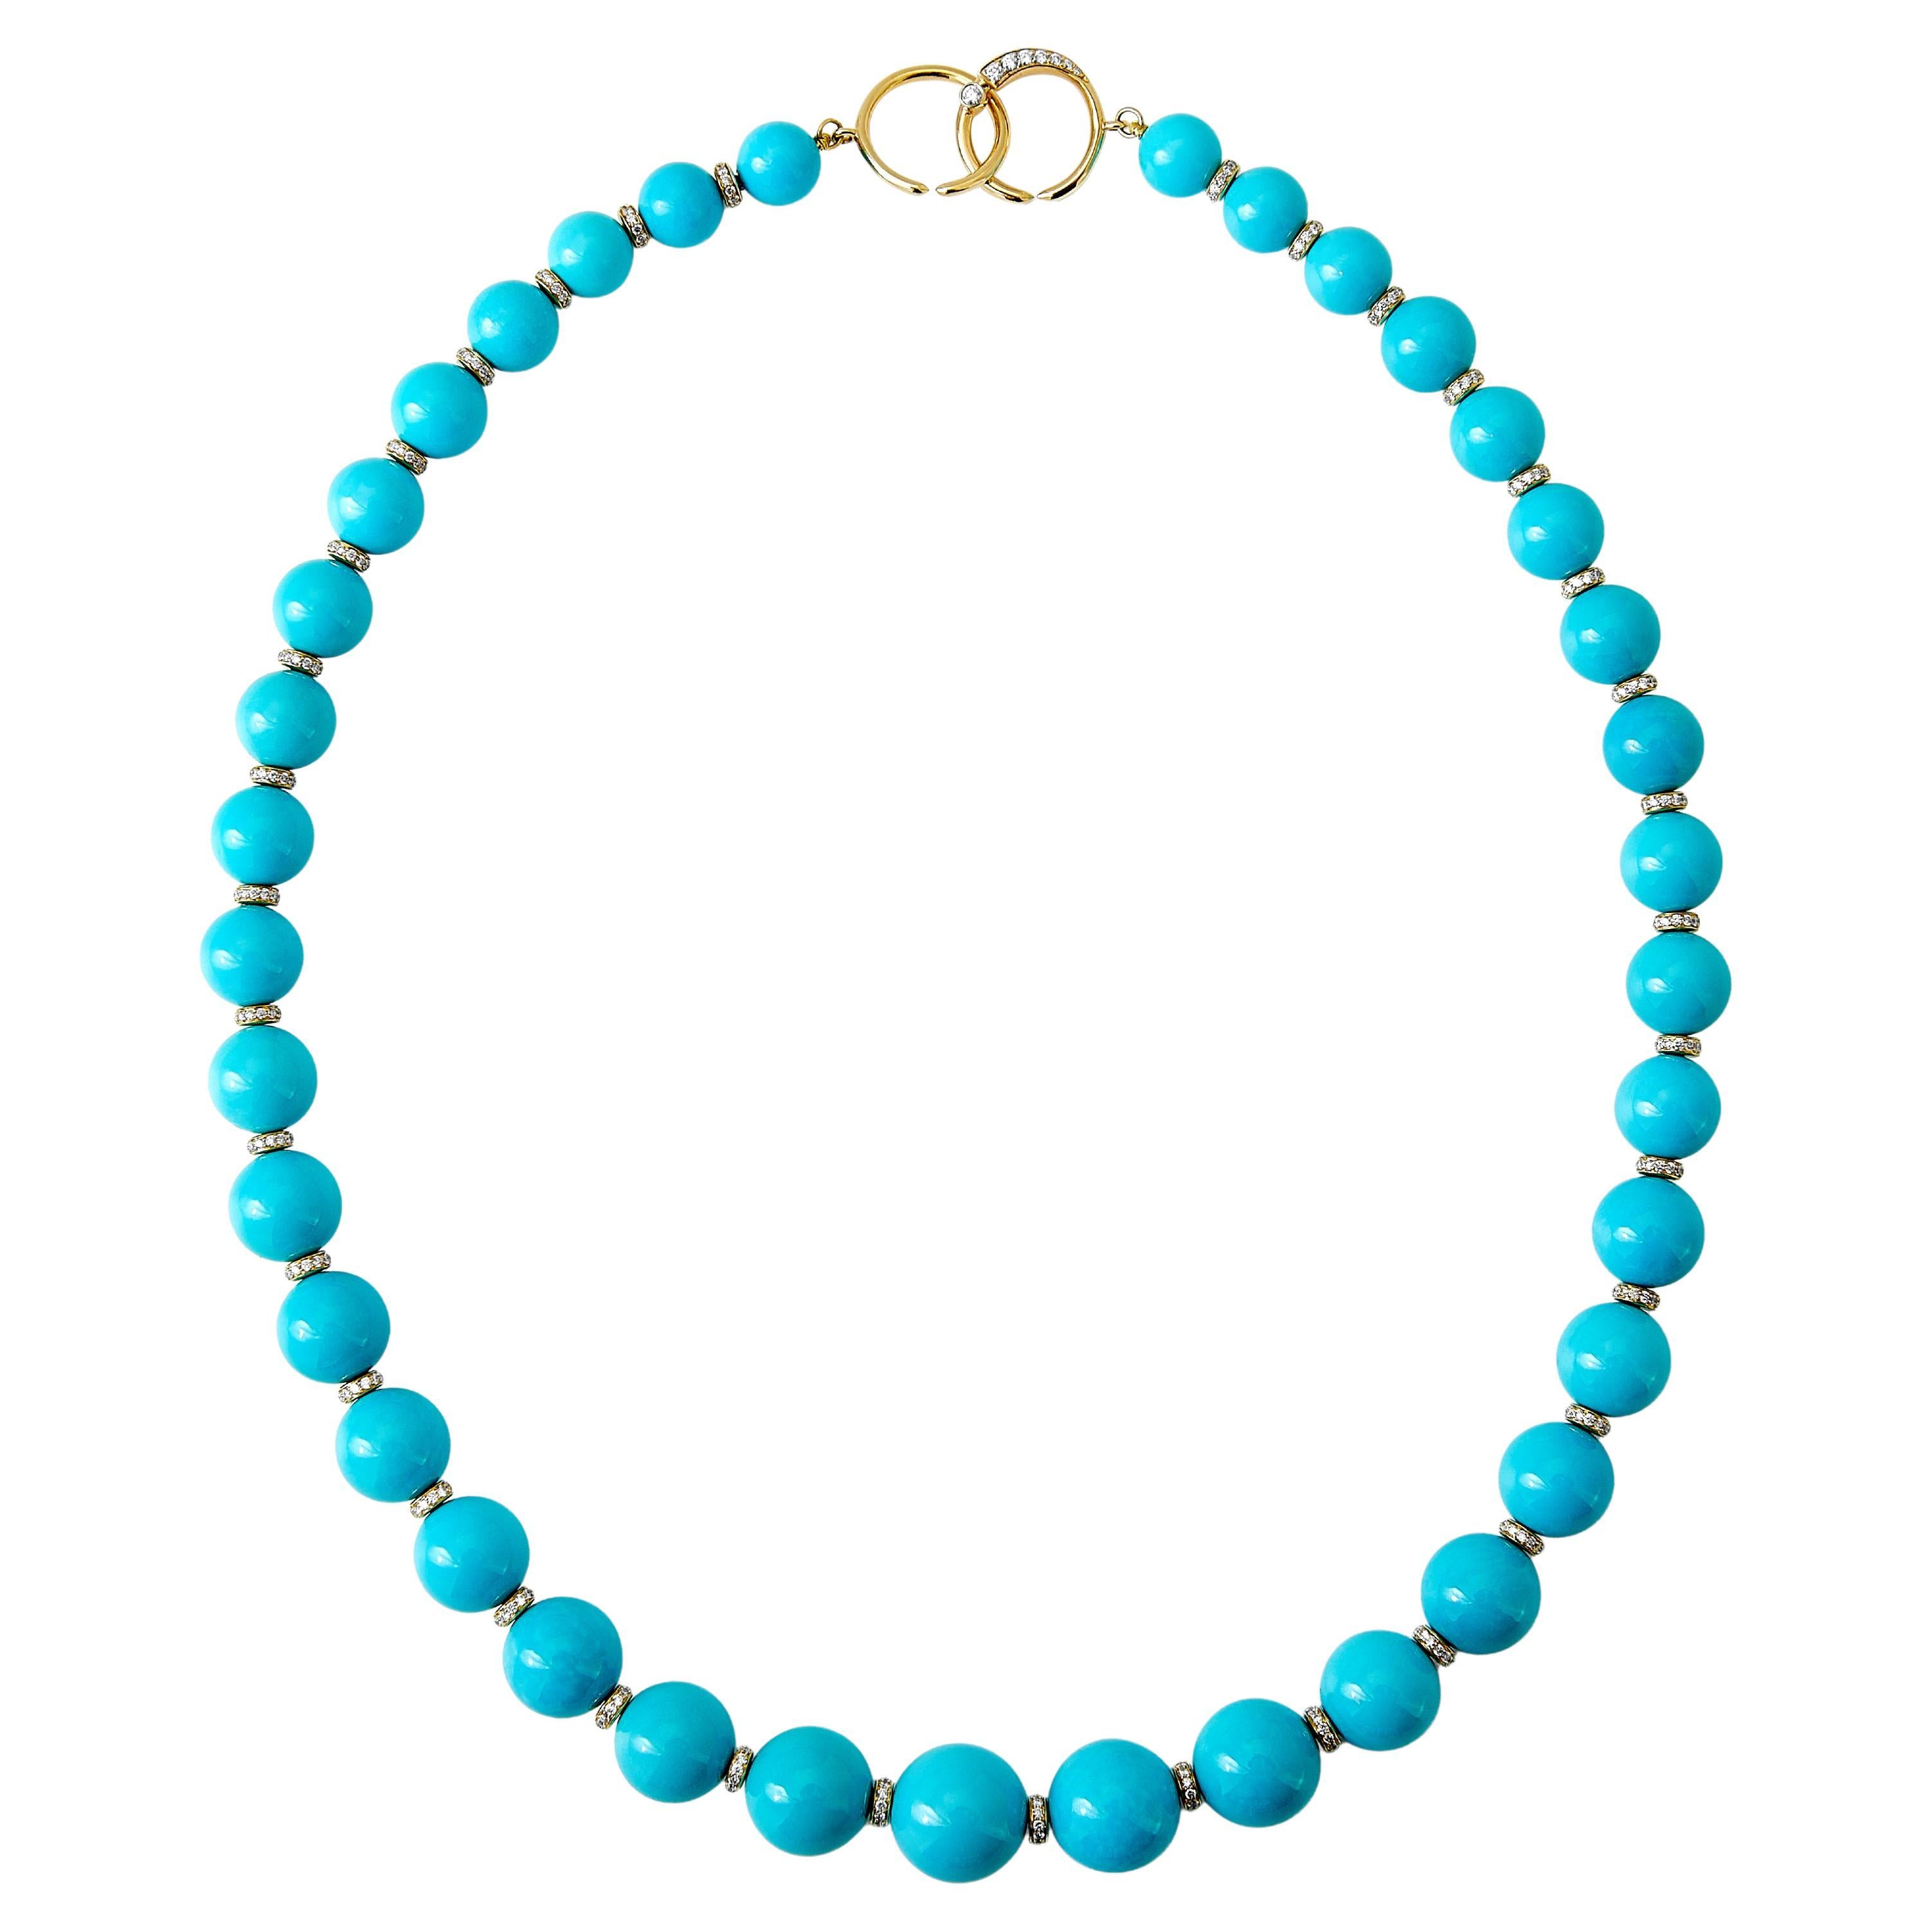 Syna Yellow Gold Sleeping Beauty Turquoise Graduating Bead Necklace with Diamond For Sale